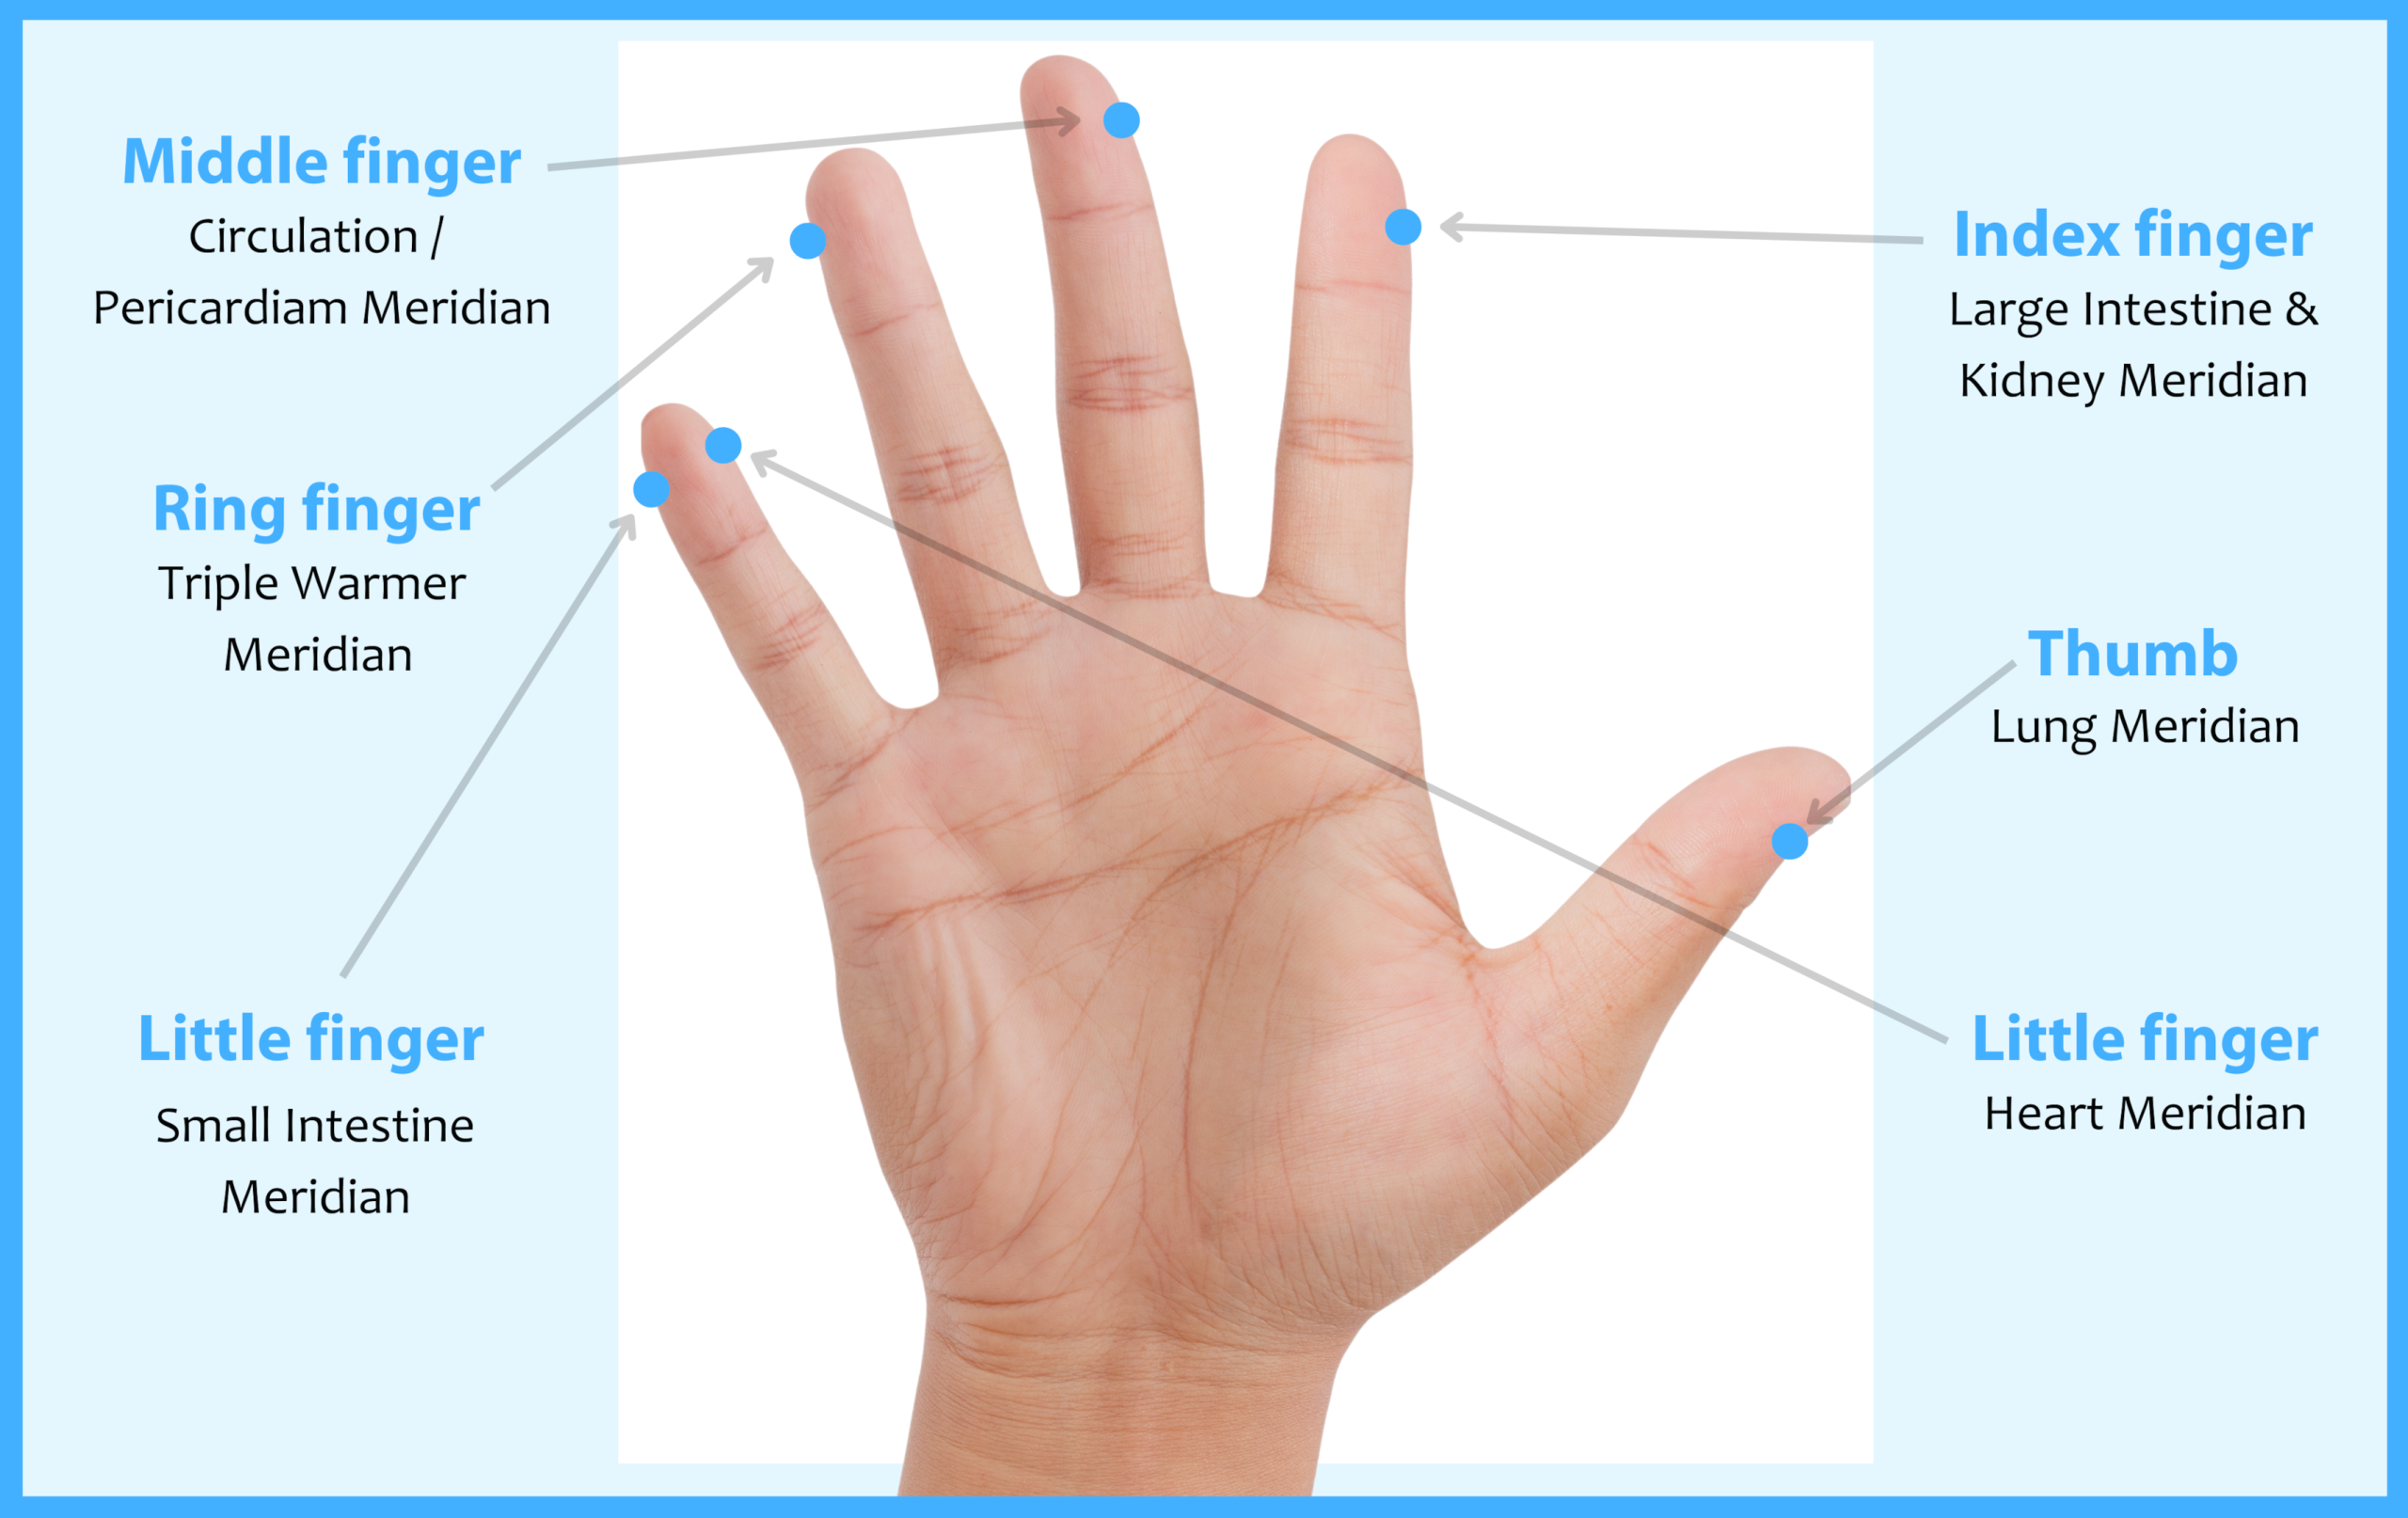 EFT Tapping Finger Points and Associated Meridians